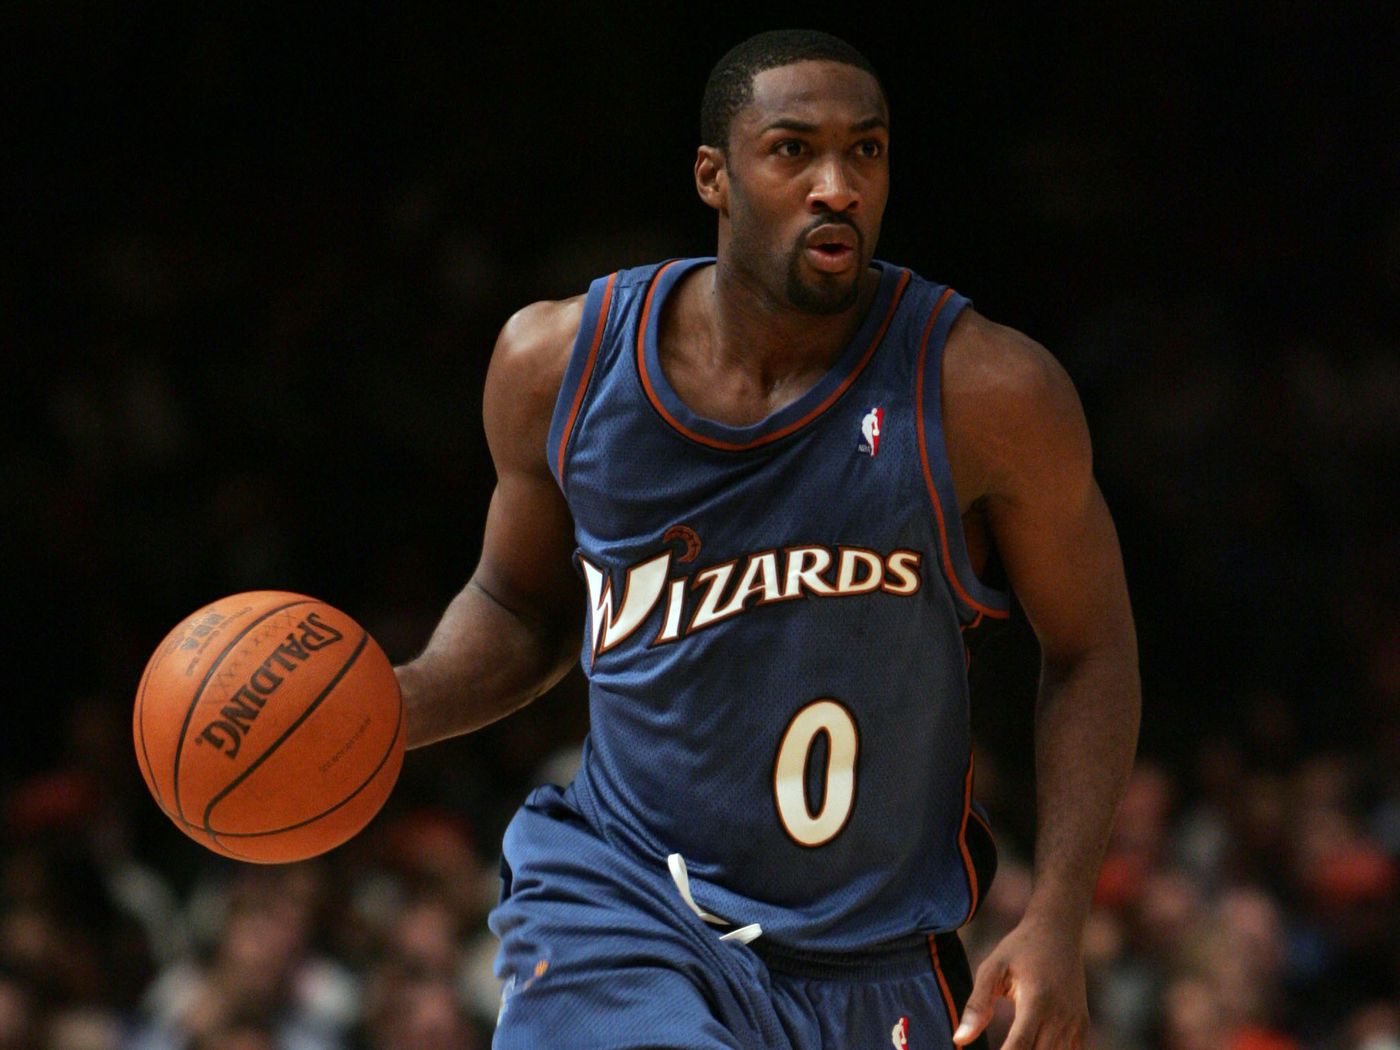 It is time for the Wizards to reconcile with Gilbert Arenas